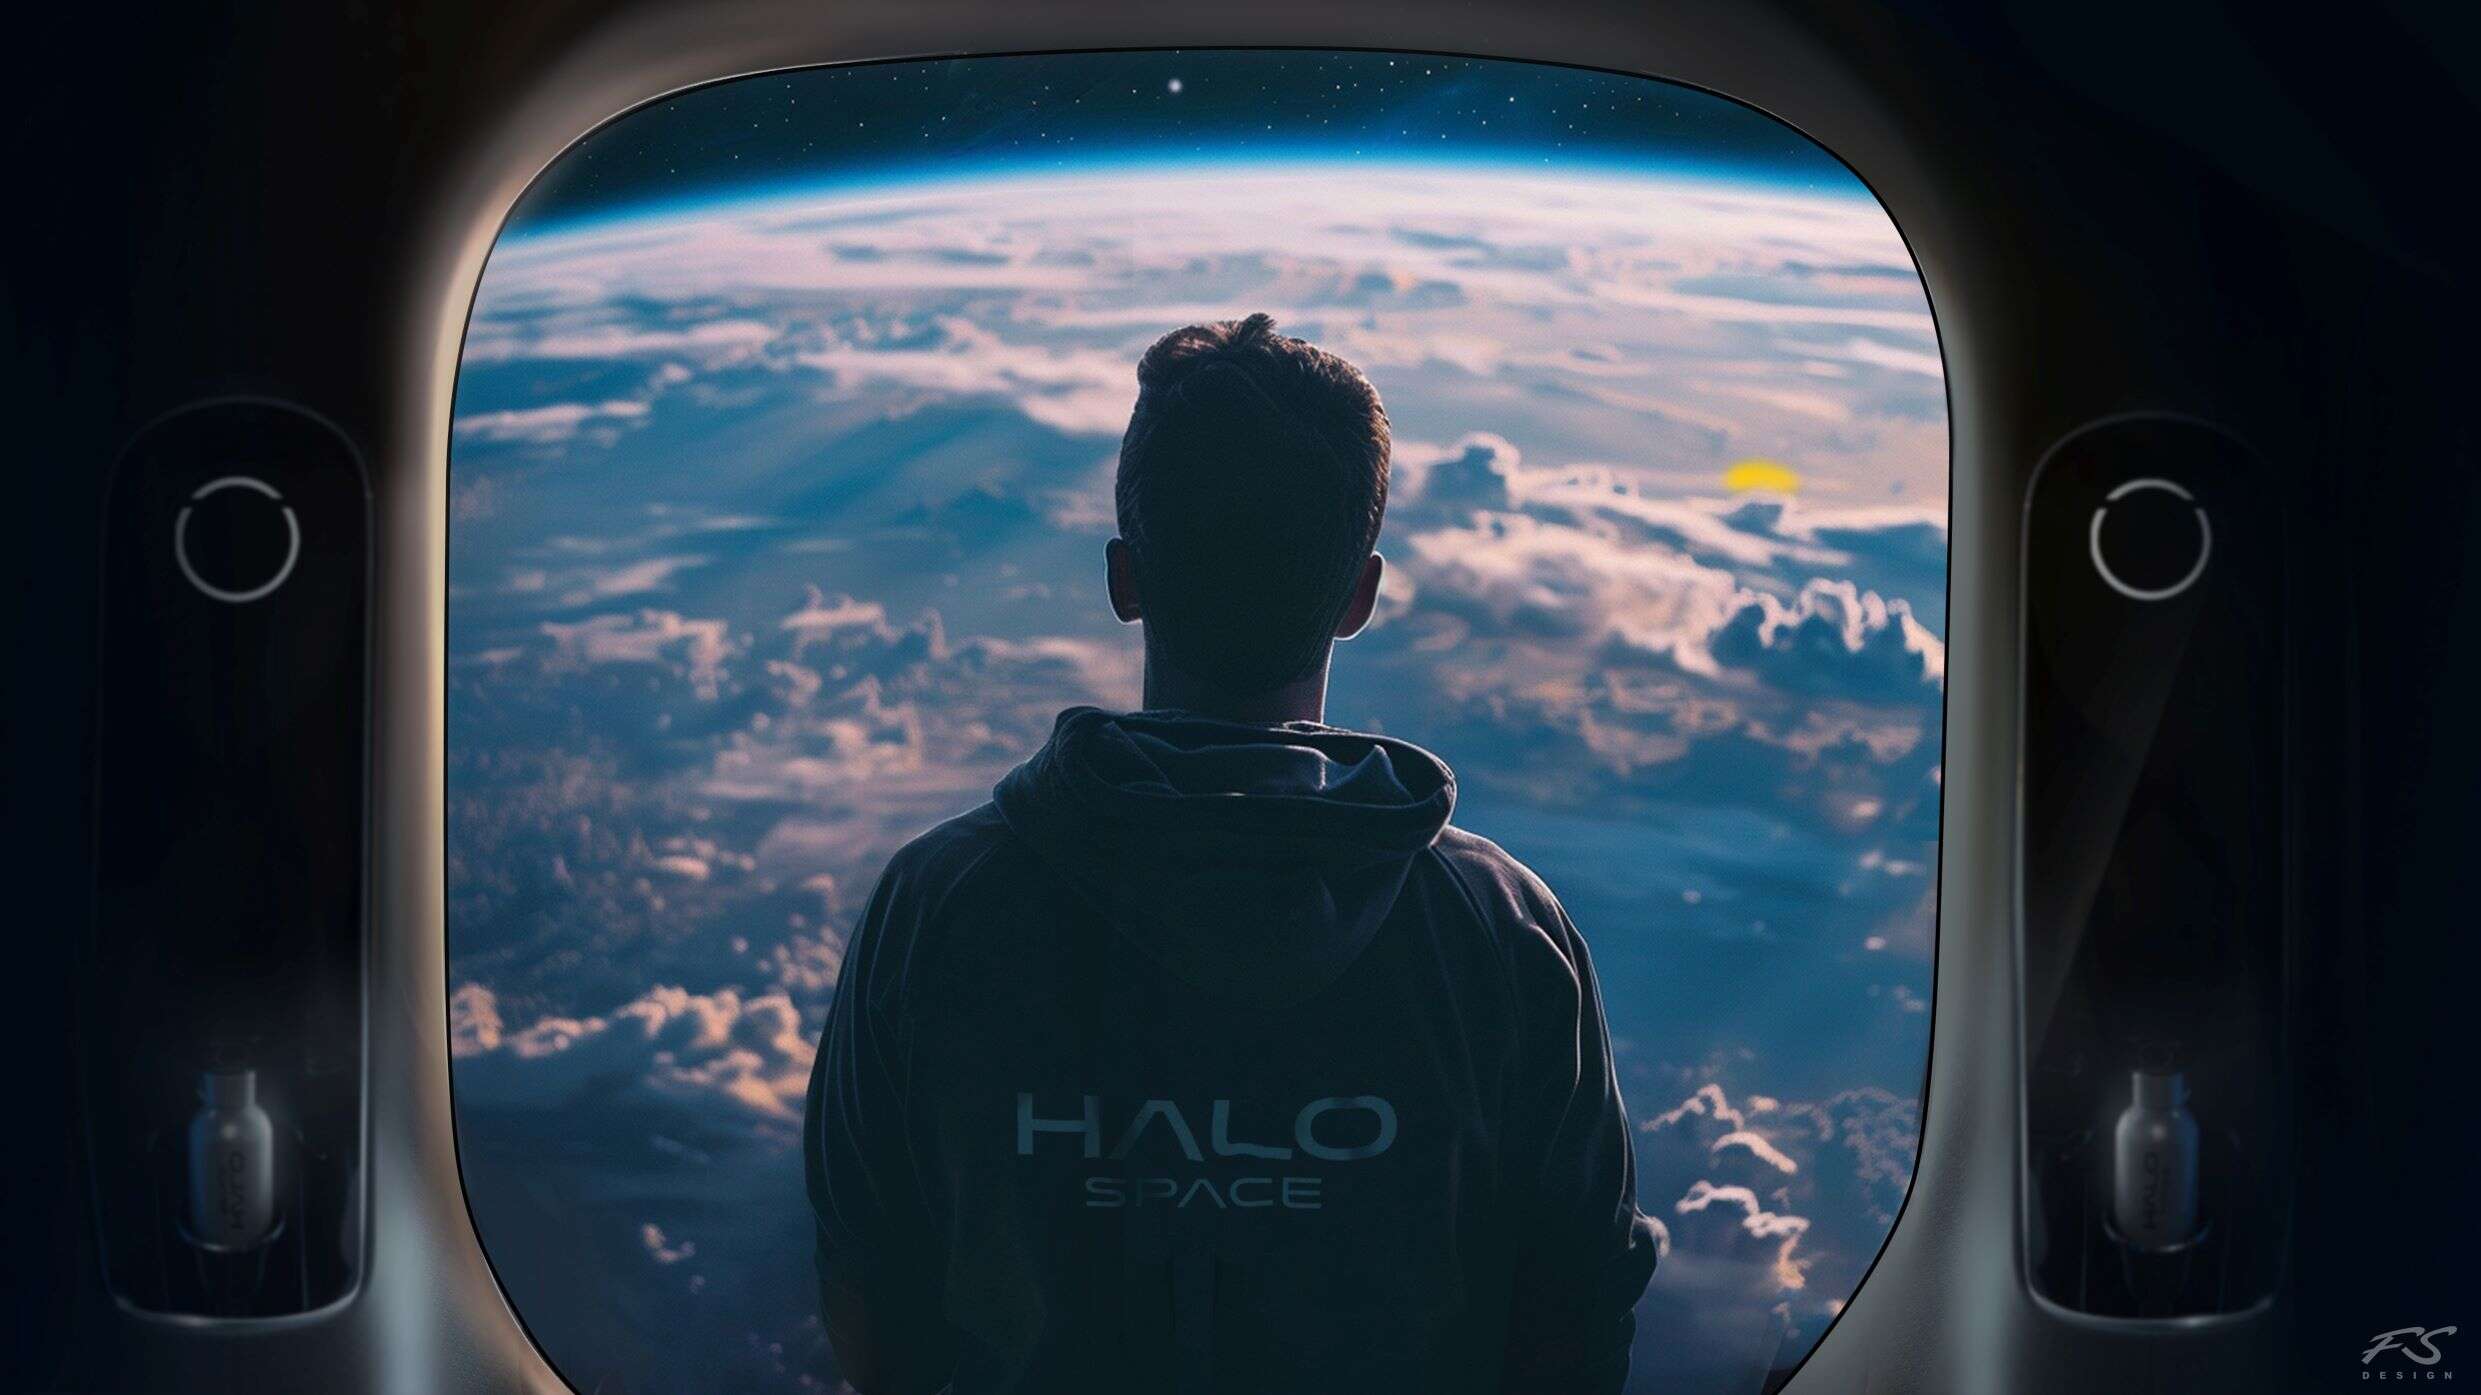 Halo Space view 